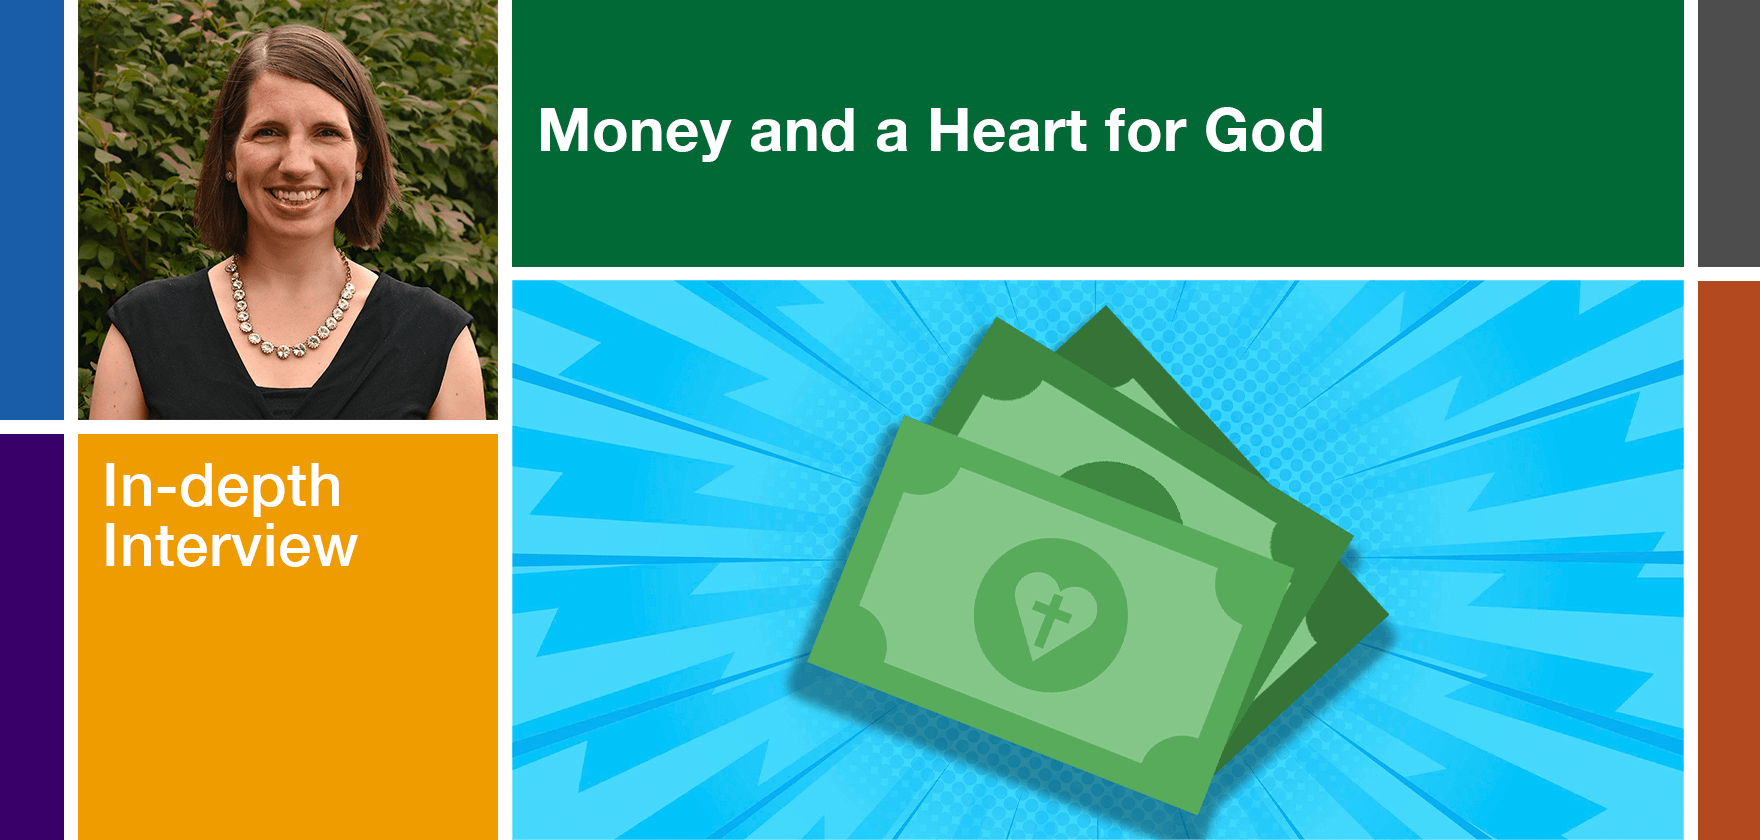 Money and a Heart for God: An In-depth Interview with Callie Picardo -  Lewis Center for Church Leadership